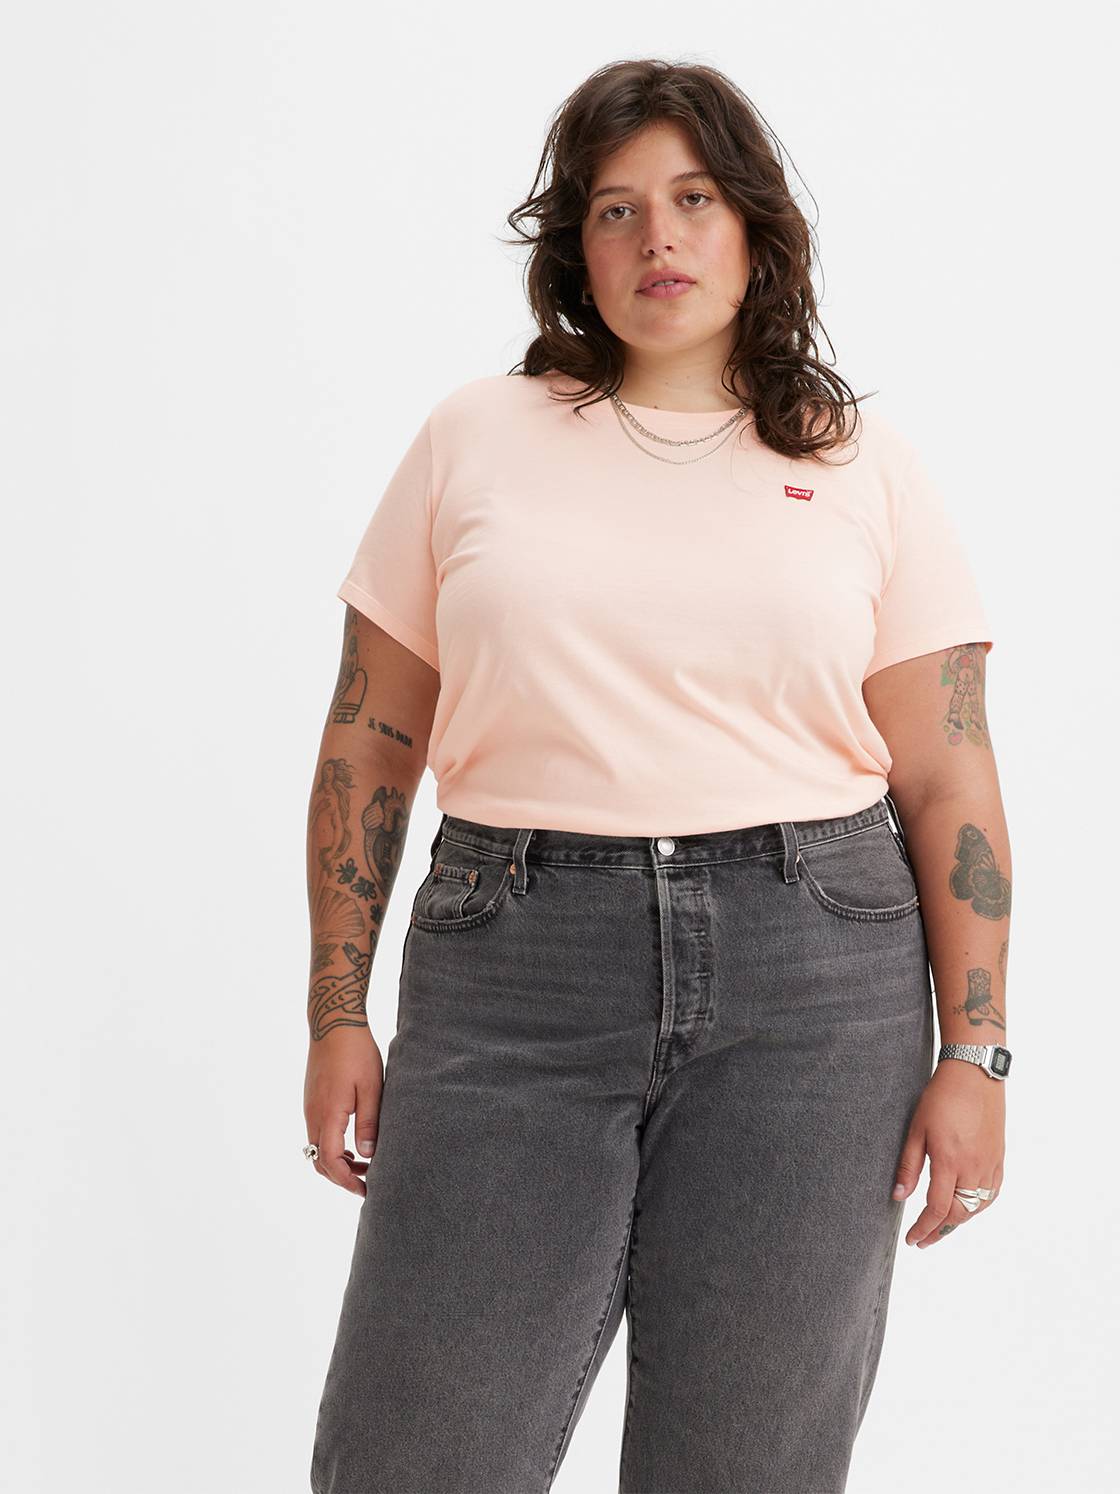 The Perfect Tee (Plus Size) 1